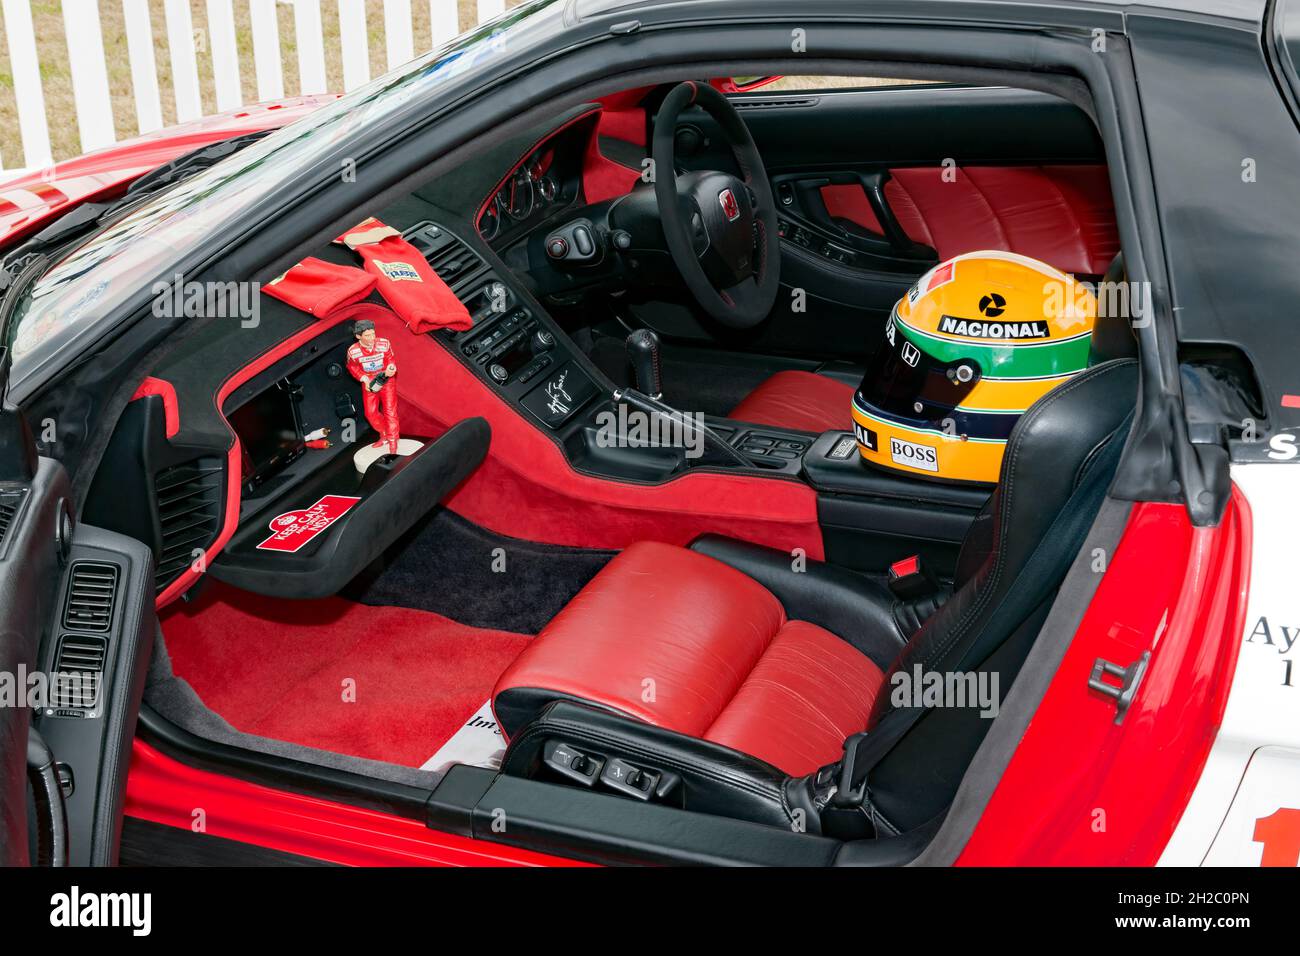 Interior view of a Red, 1992, Honda NSX dedicated to Ayrton Senna, on display at the 2021 London Classic Car Show Stock Photo